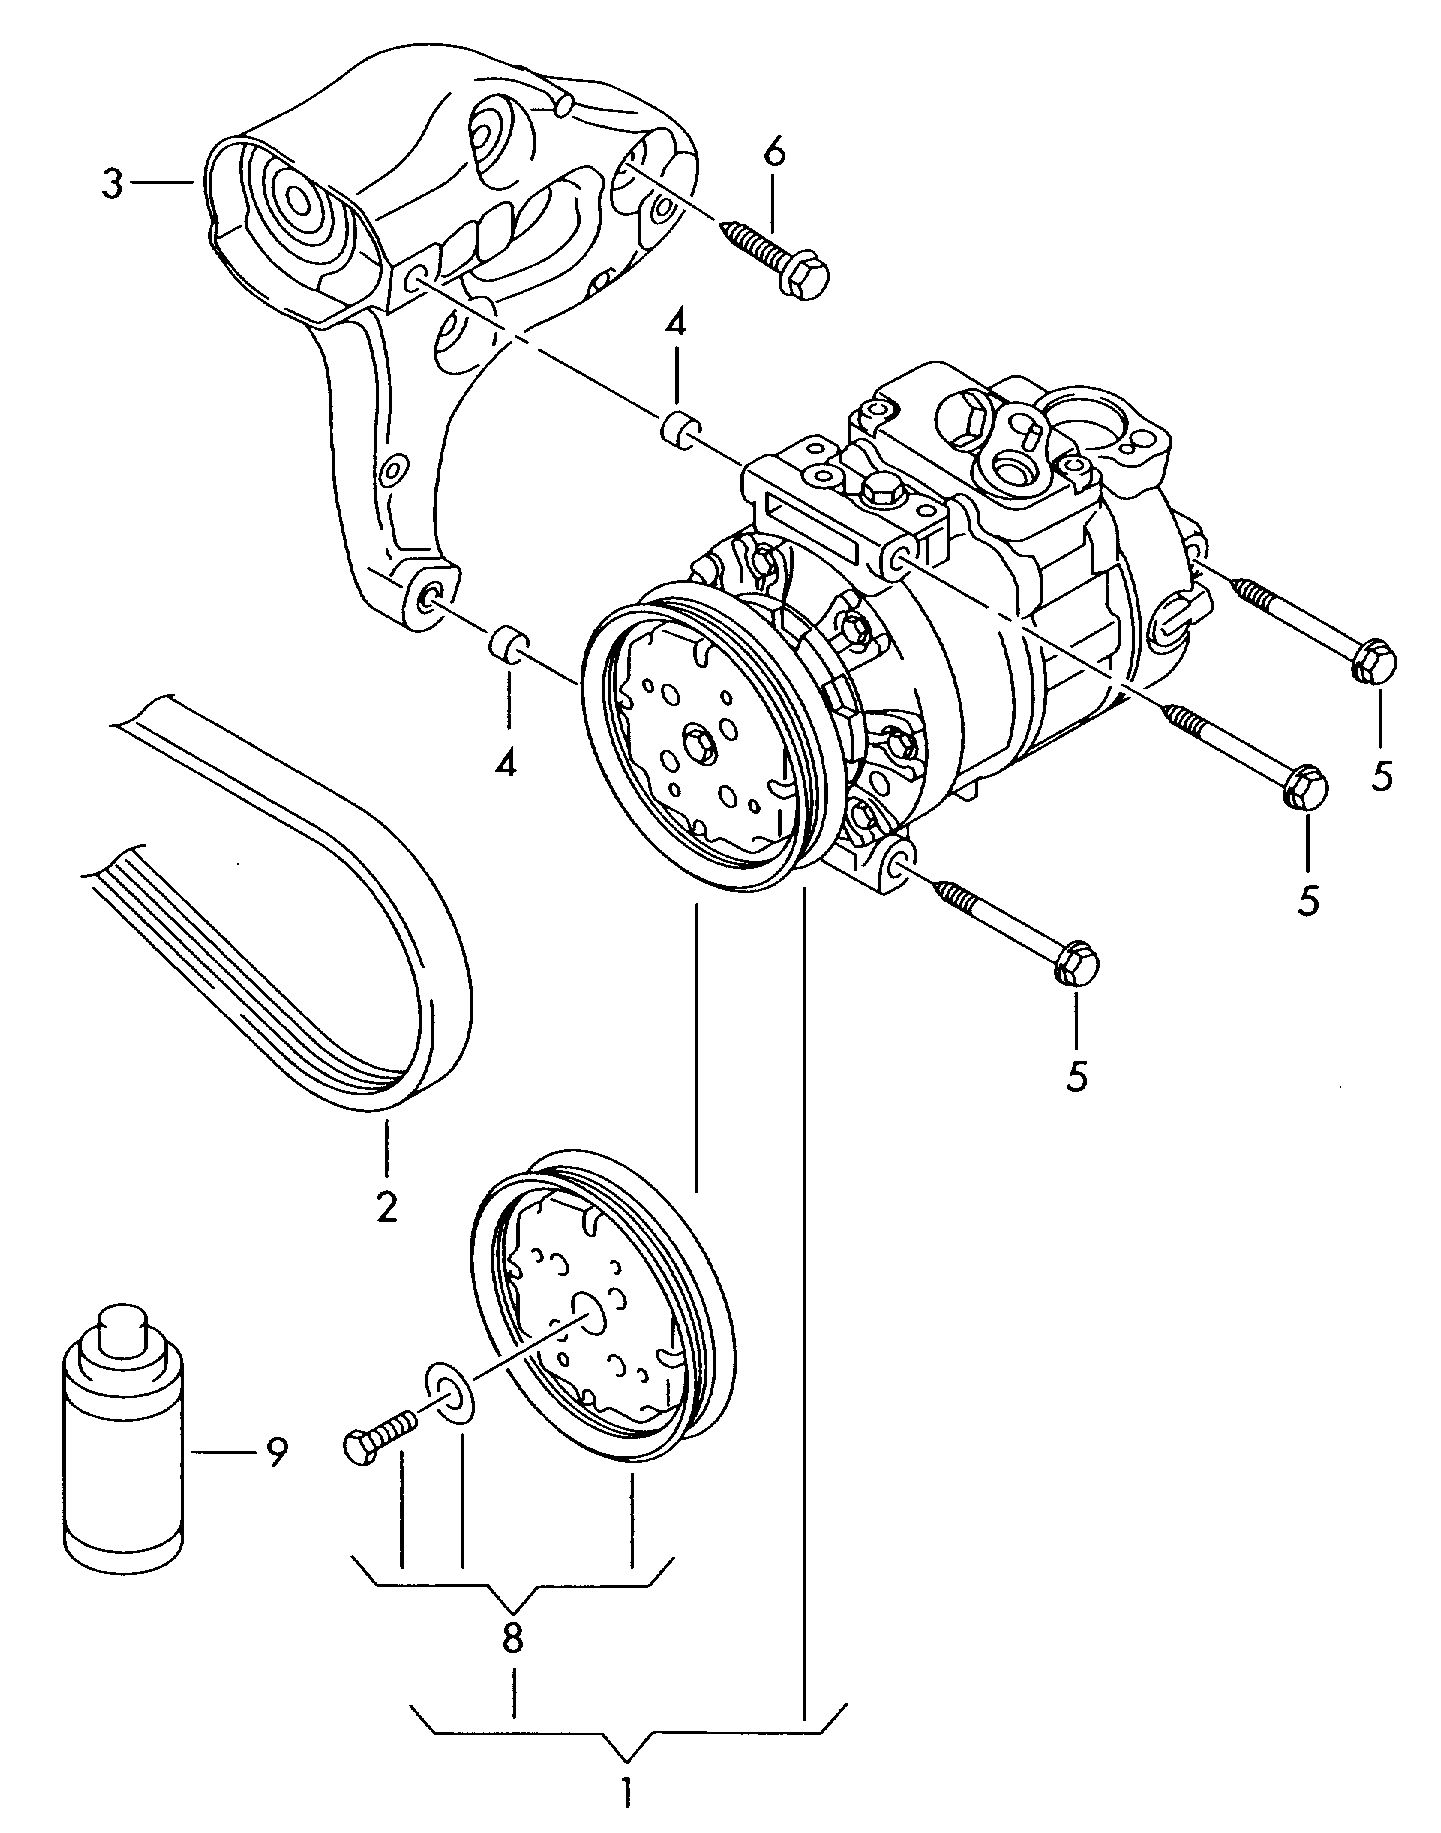 A/C compressorconnecting and mounting parts<br>for compressorBefore parts order,<br>physical inspection of<br>old part necessary  - Octavia - oct